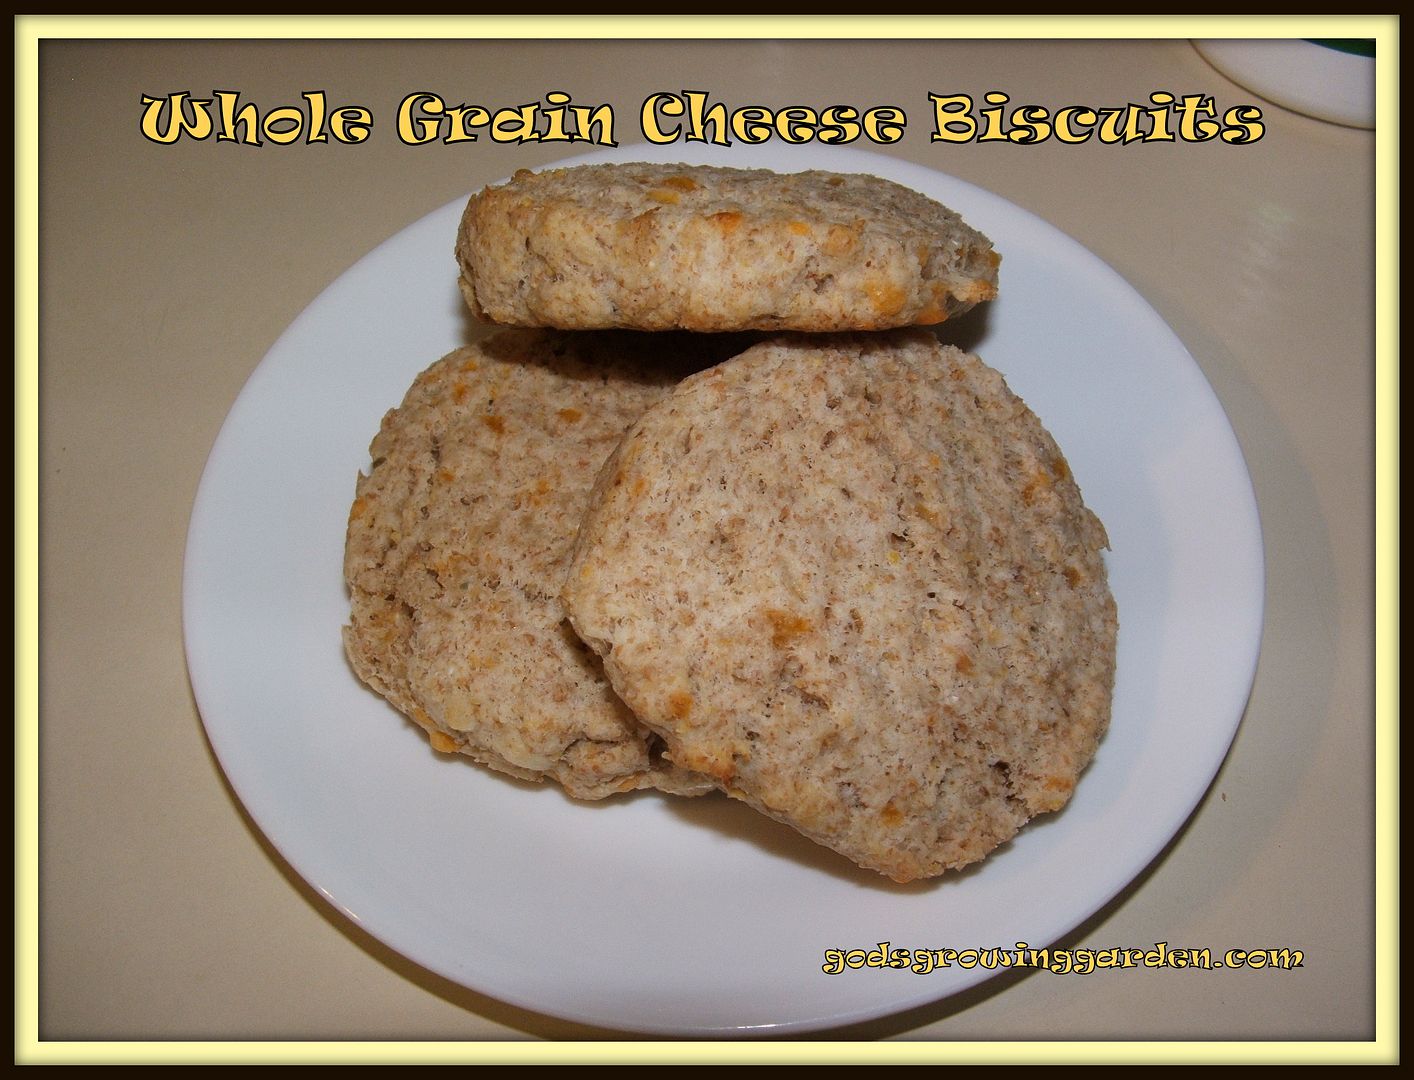 Whole Grain Cheese Biscuits by Angie Ouellette-Tower for godsgrowinggarden.com photo 006_zps68a4882a.jpg